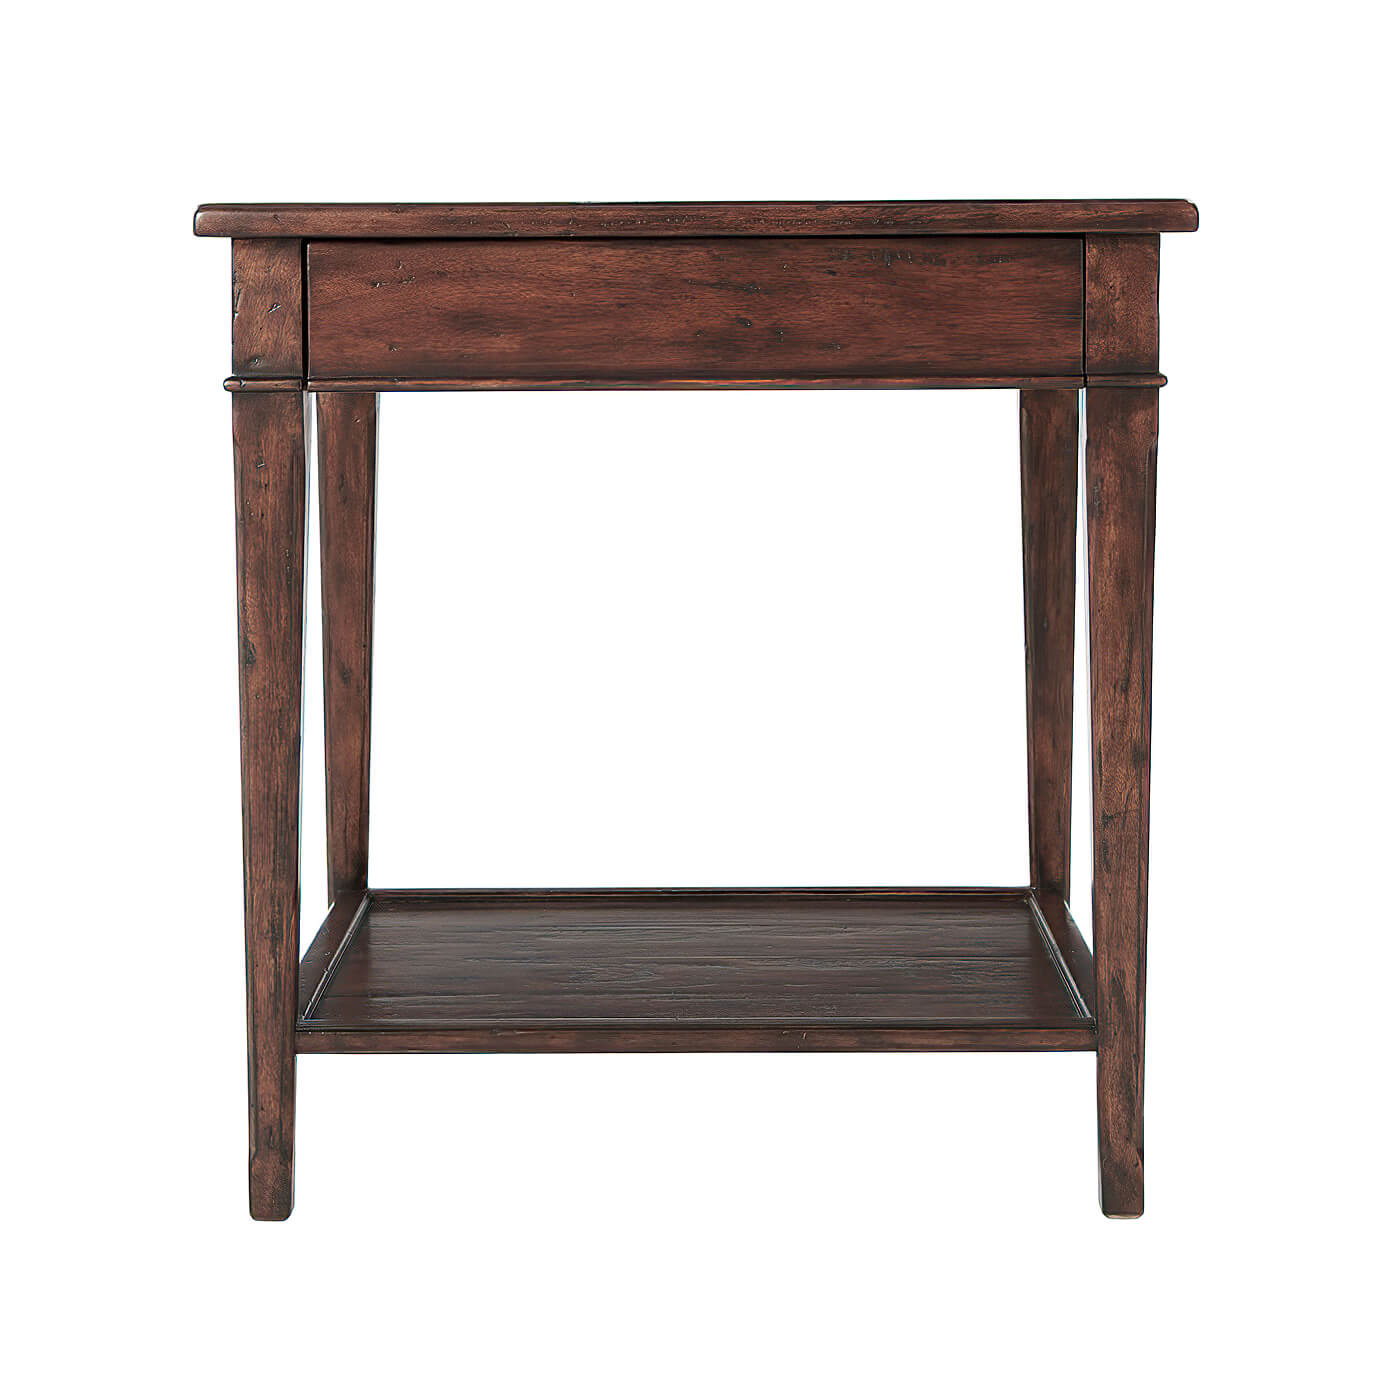 French Provincial Antiqued End Table - English Georgian America